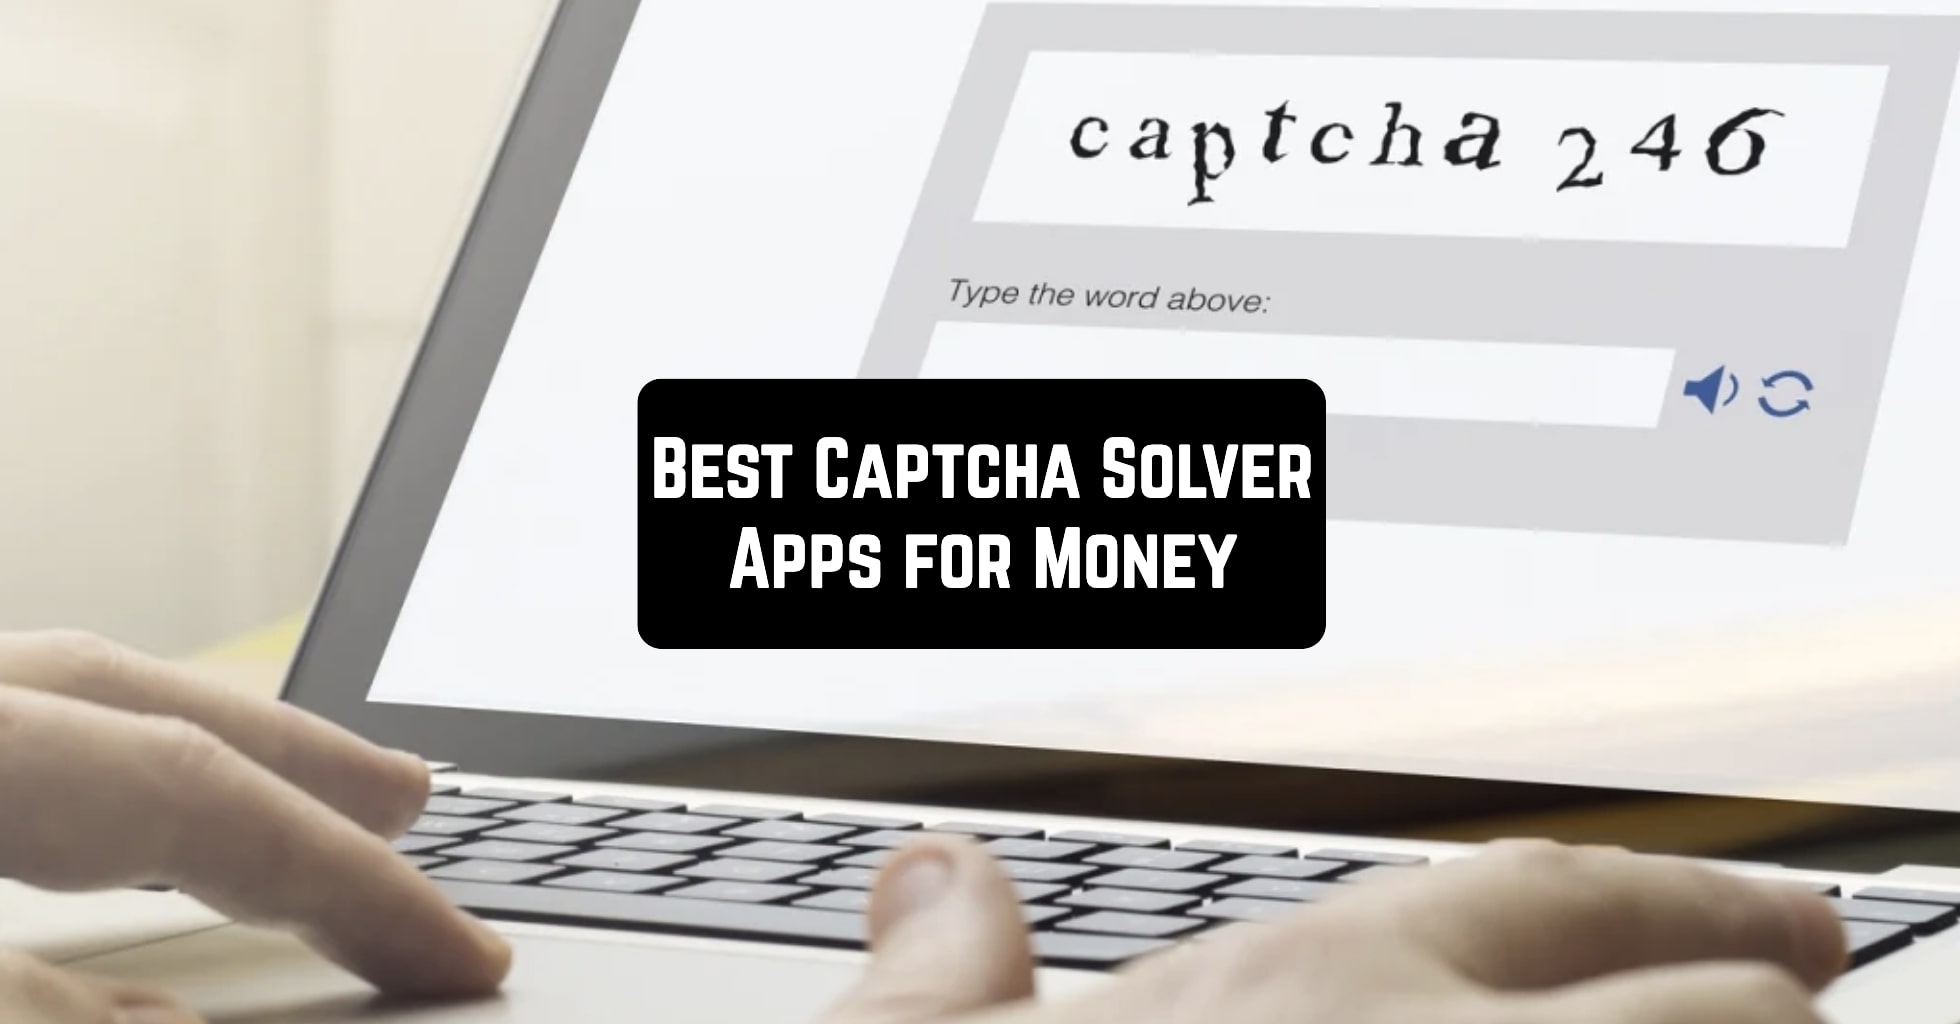 4 Best Captcha Solver Apps for Money (Android & iOS)